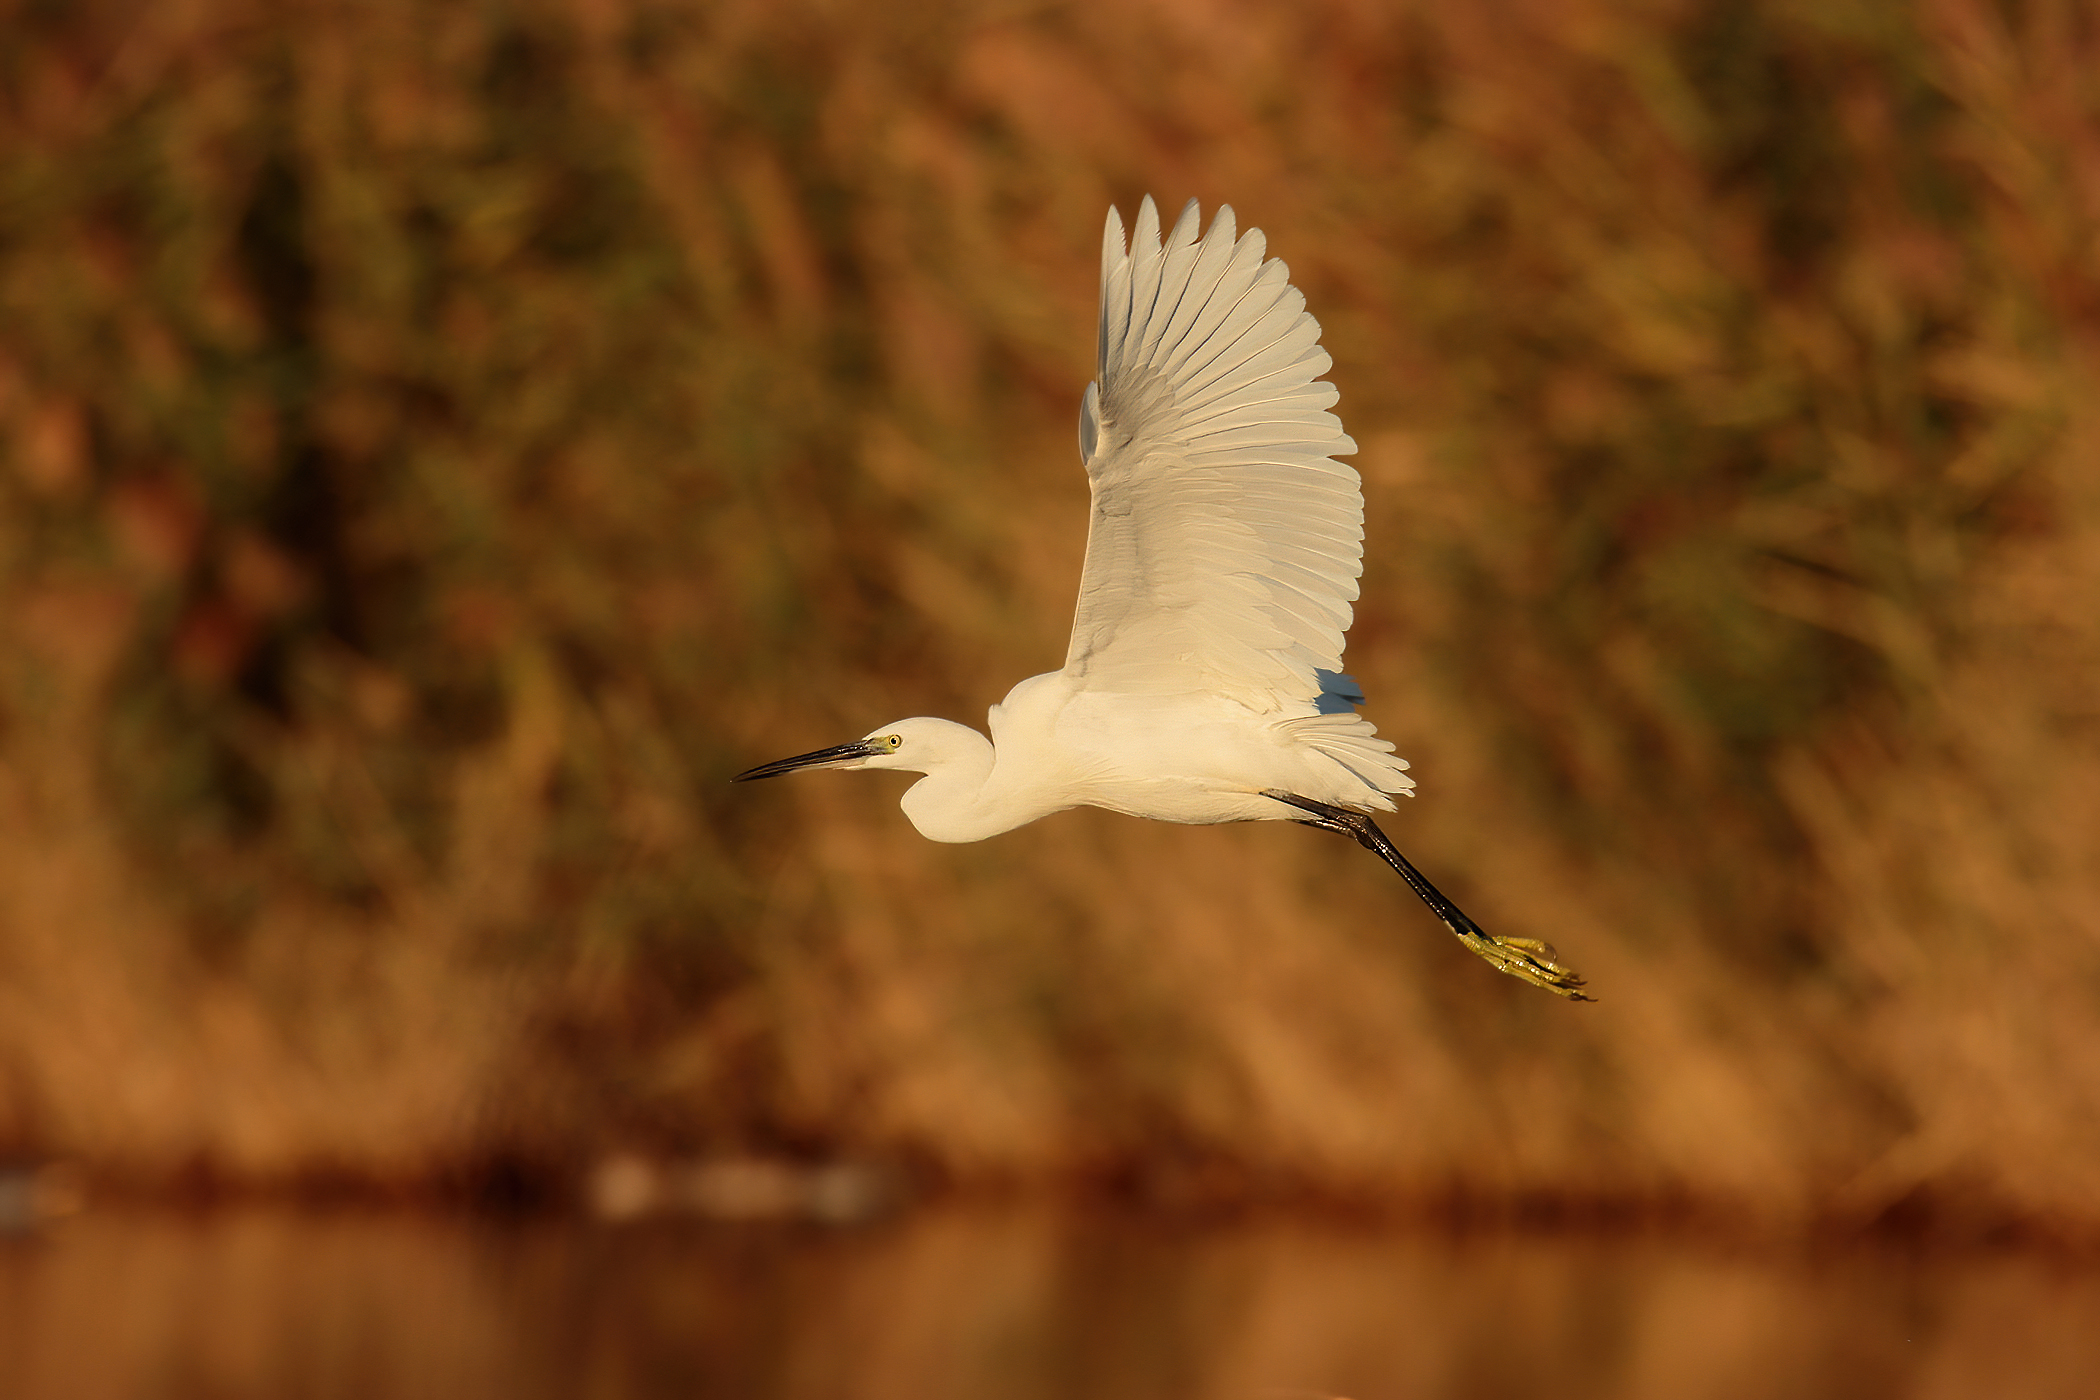 Egret in flight at the first rays of sunshine...